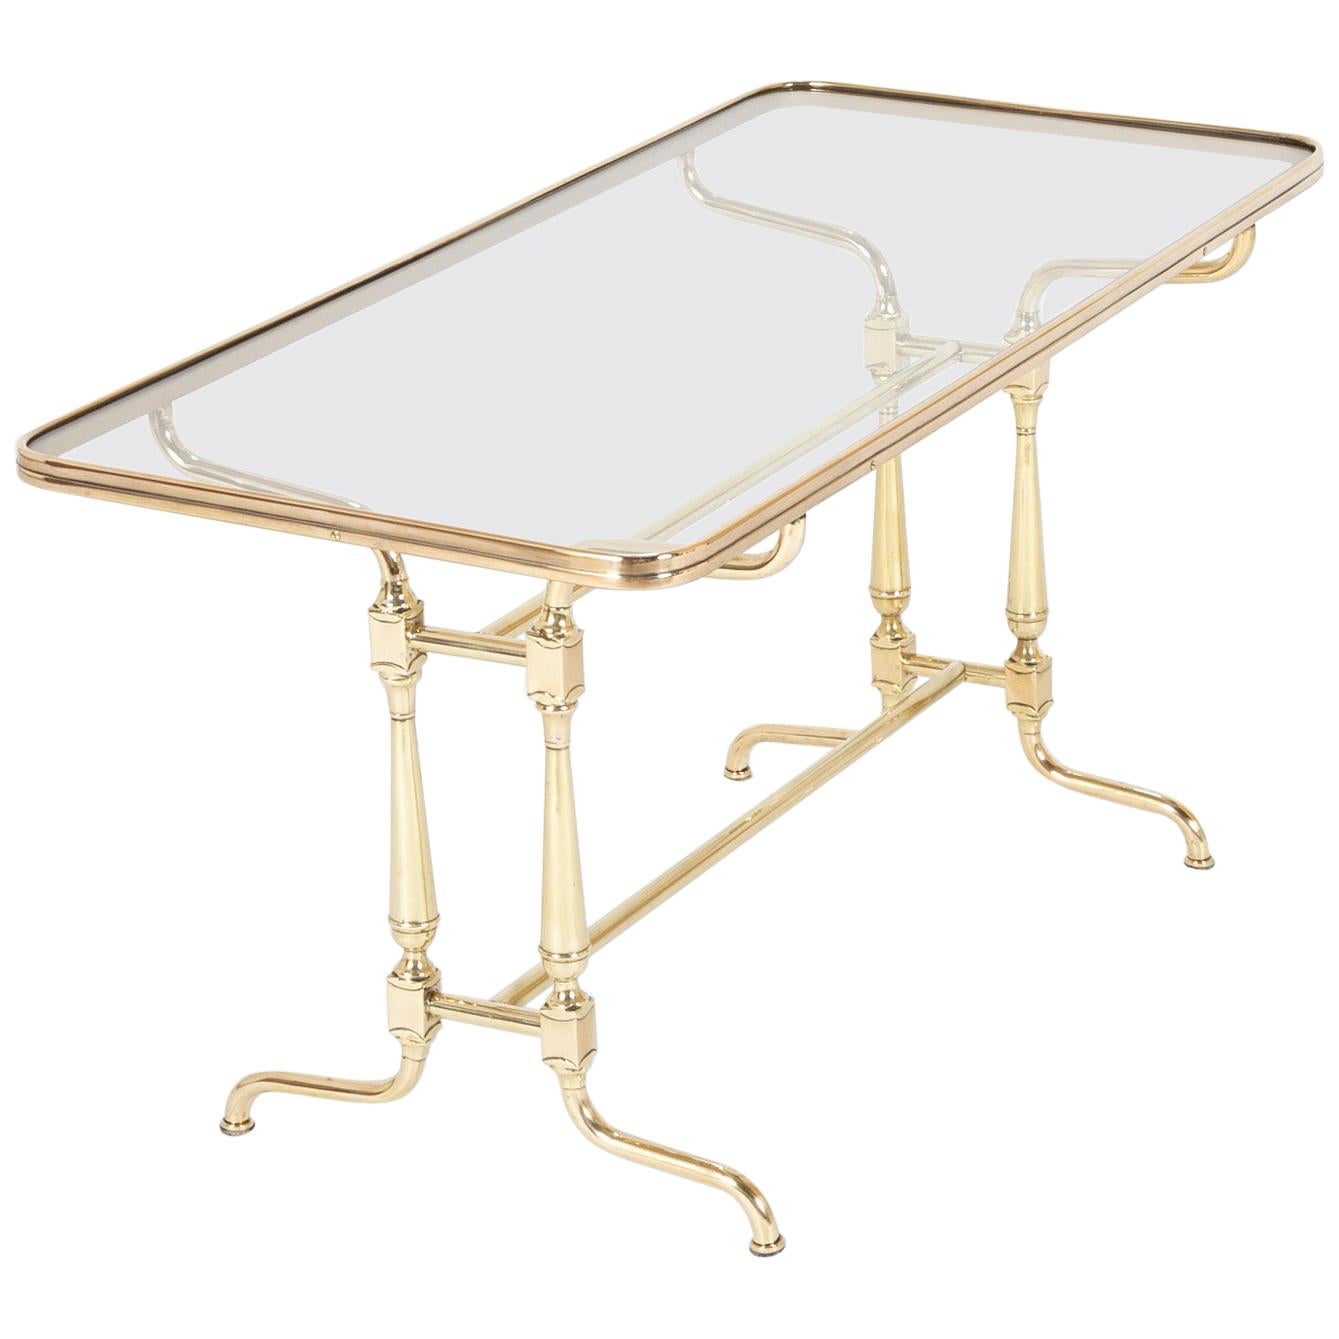 Early 20th Century French Glass Top Brass Coffee Table For Sale